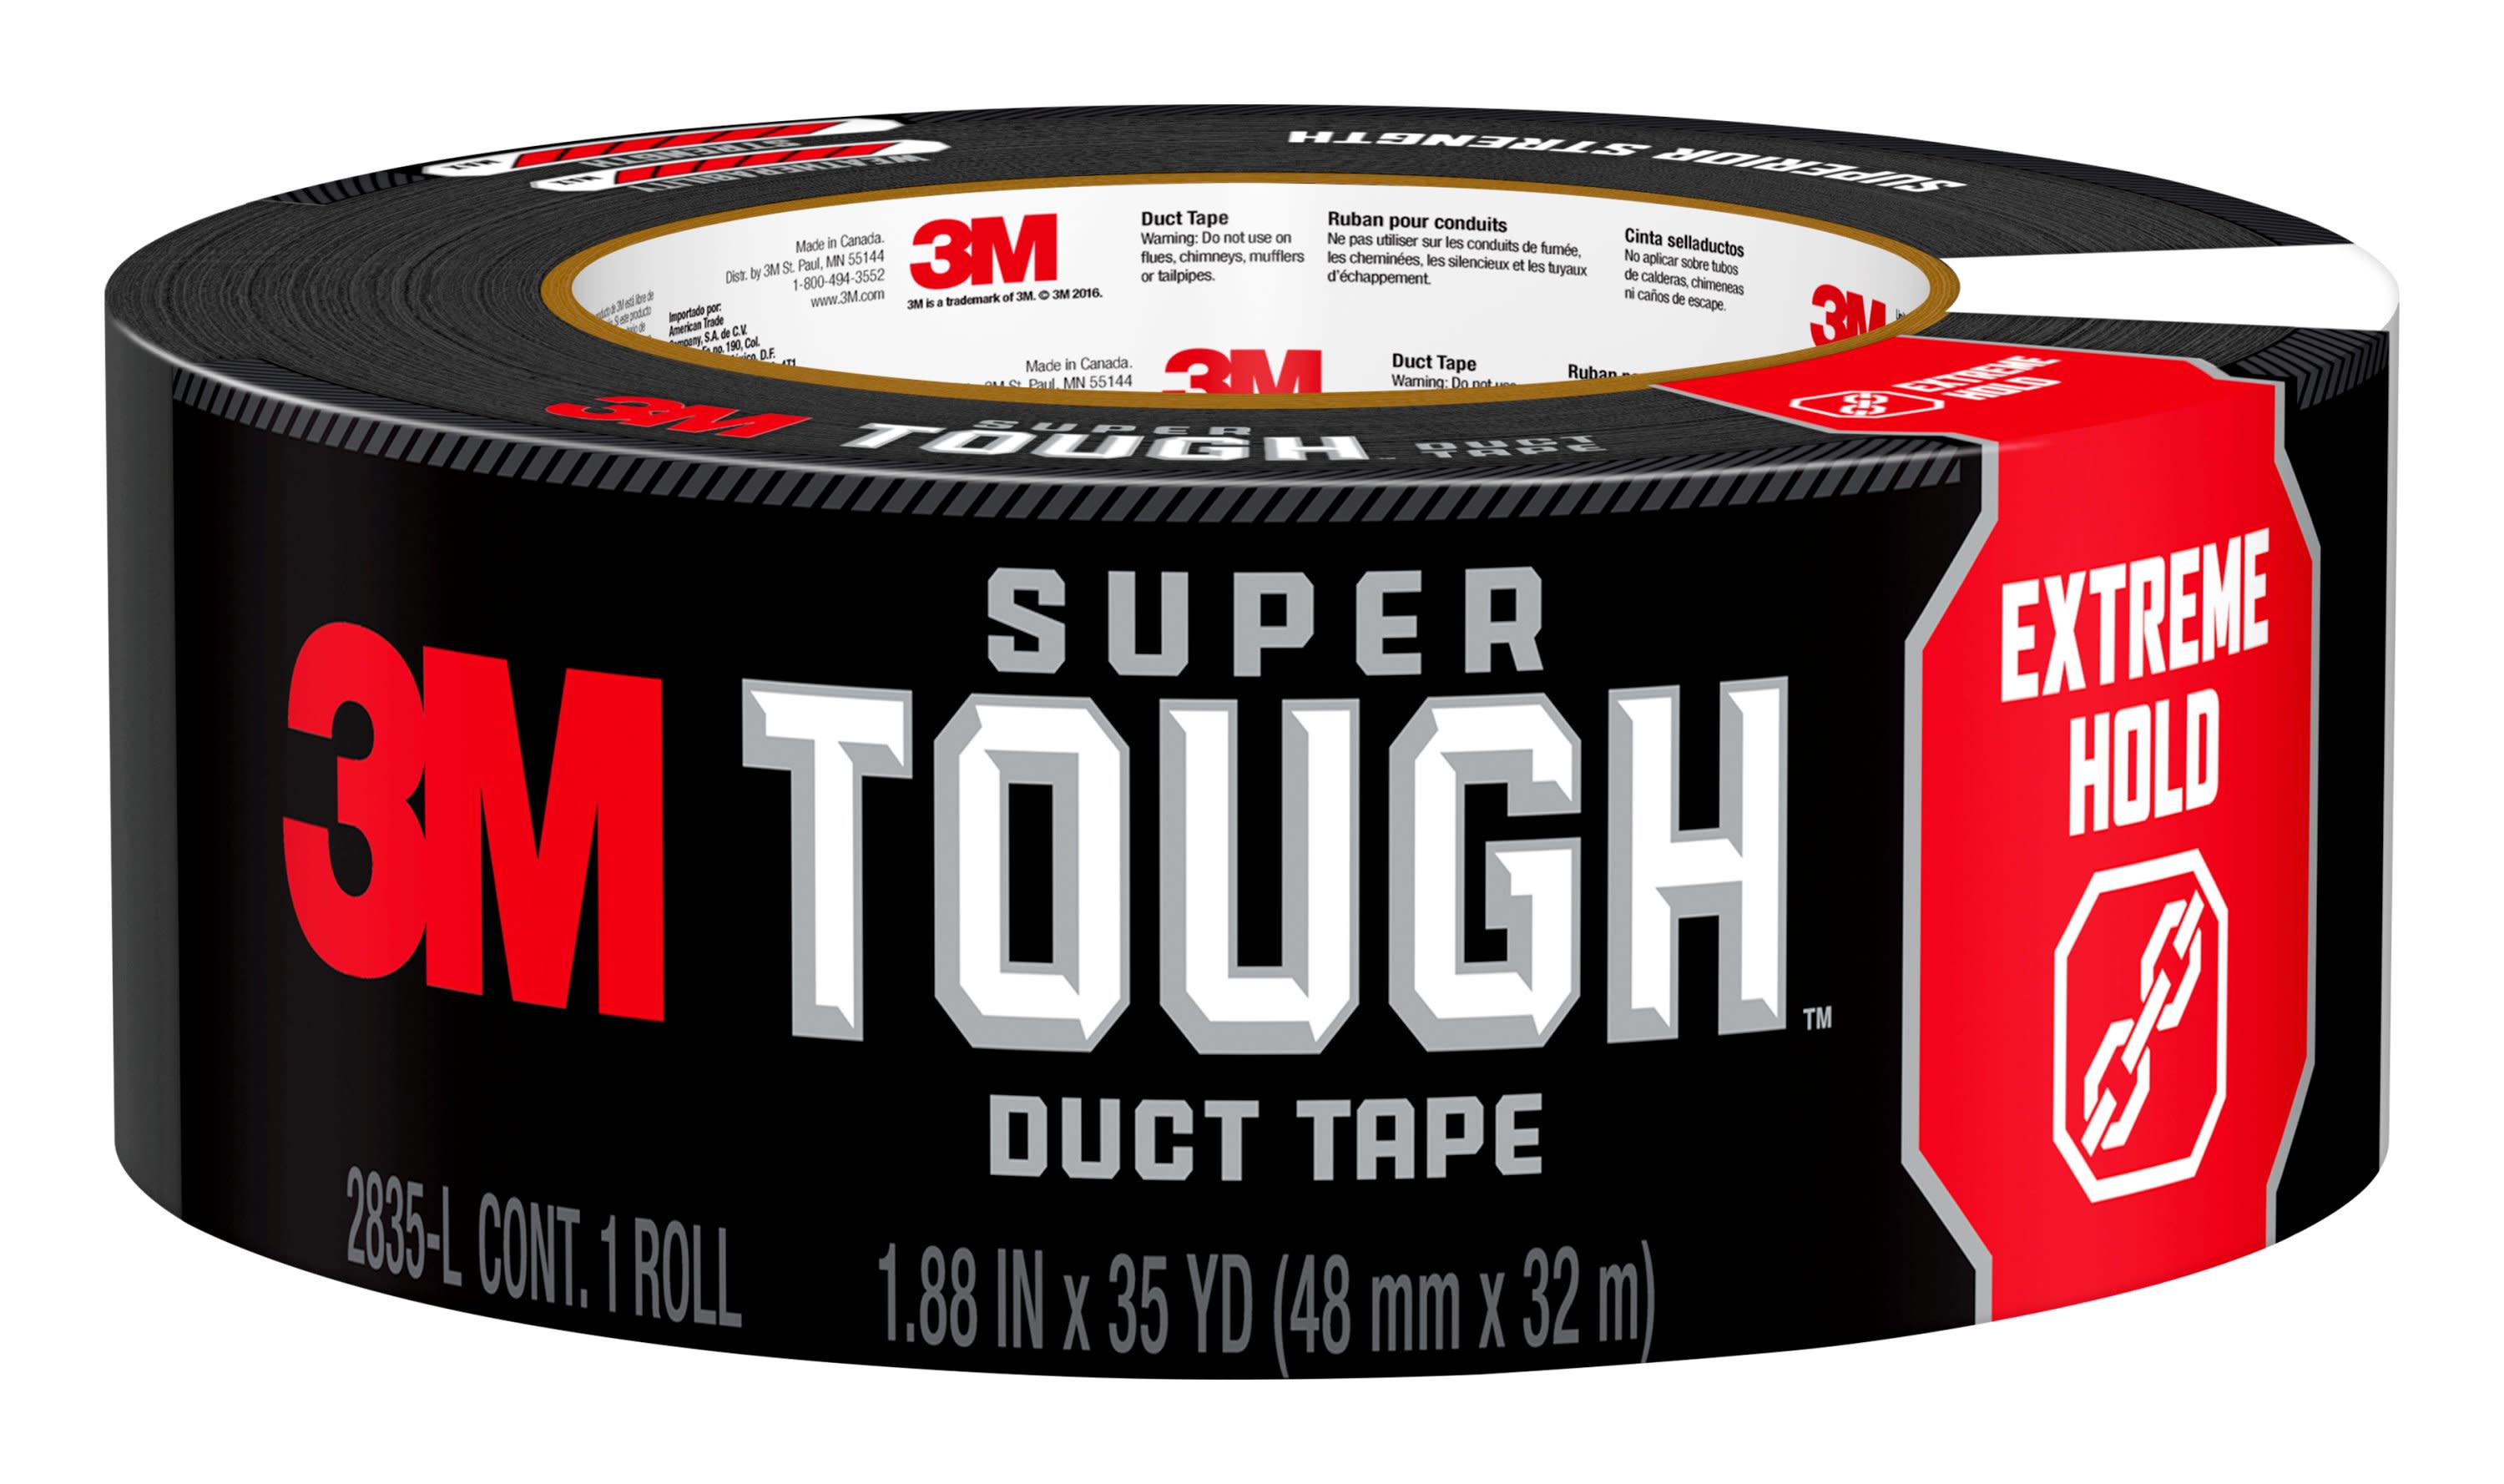 PACK OF 12 Tape It Silver Duct Tape 2 X 30 Yards 